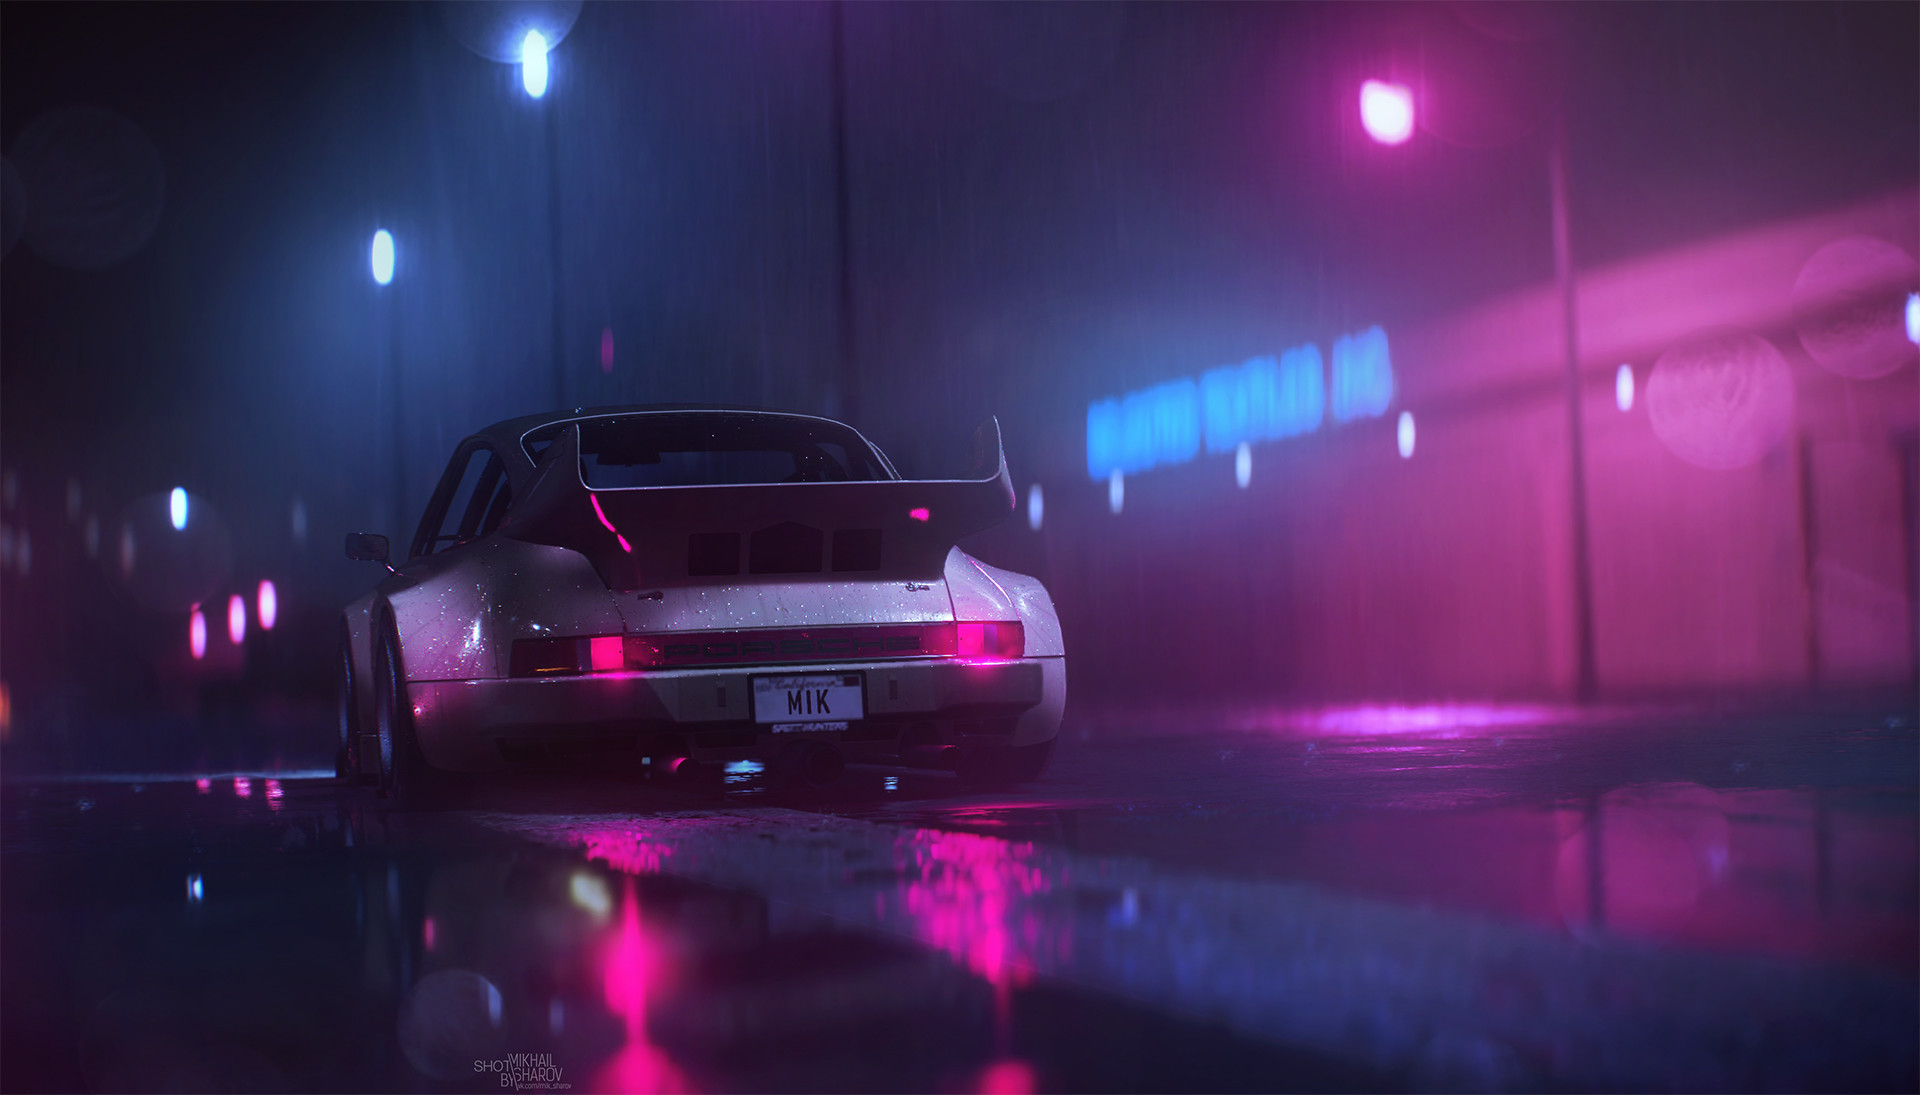 General 1920x1095 Need for Speed 2015 Need for Speed video games PC gaming car rain screen shot Porsche vehicle pink